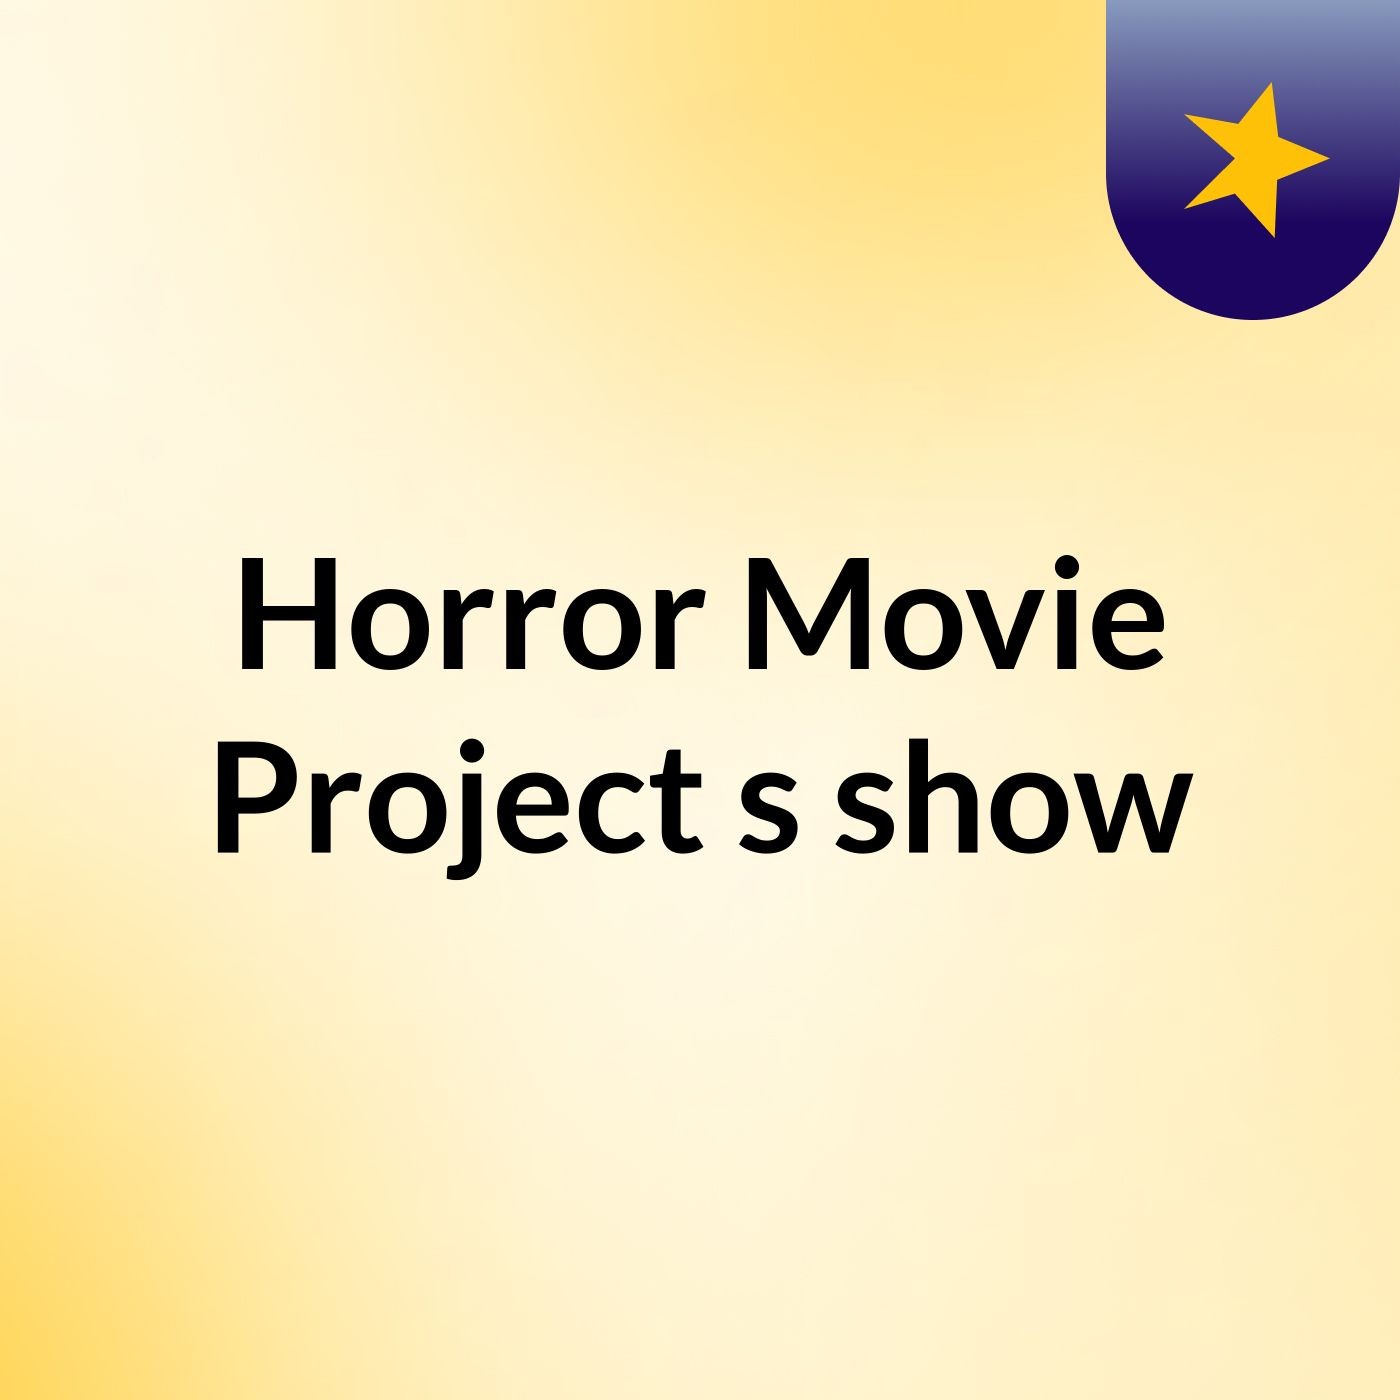 Horror Movie Project's show